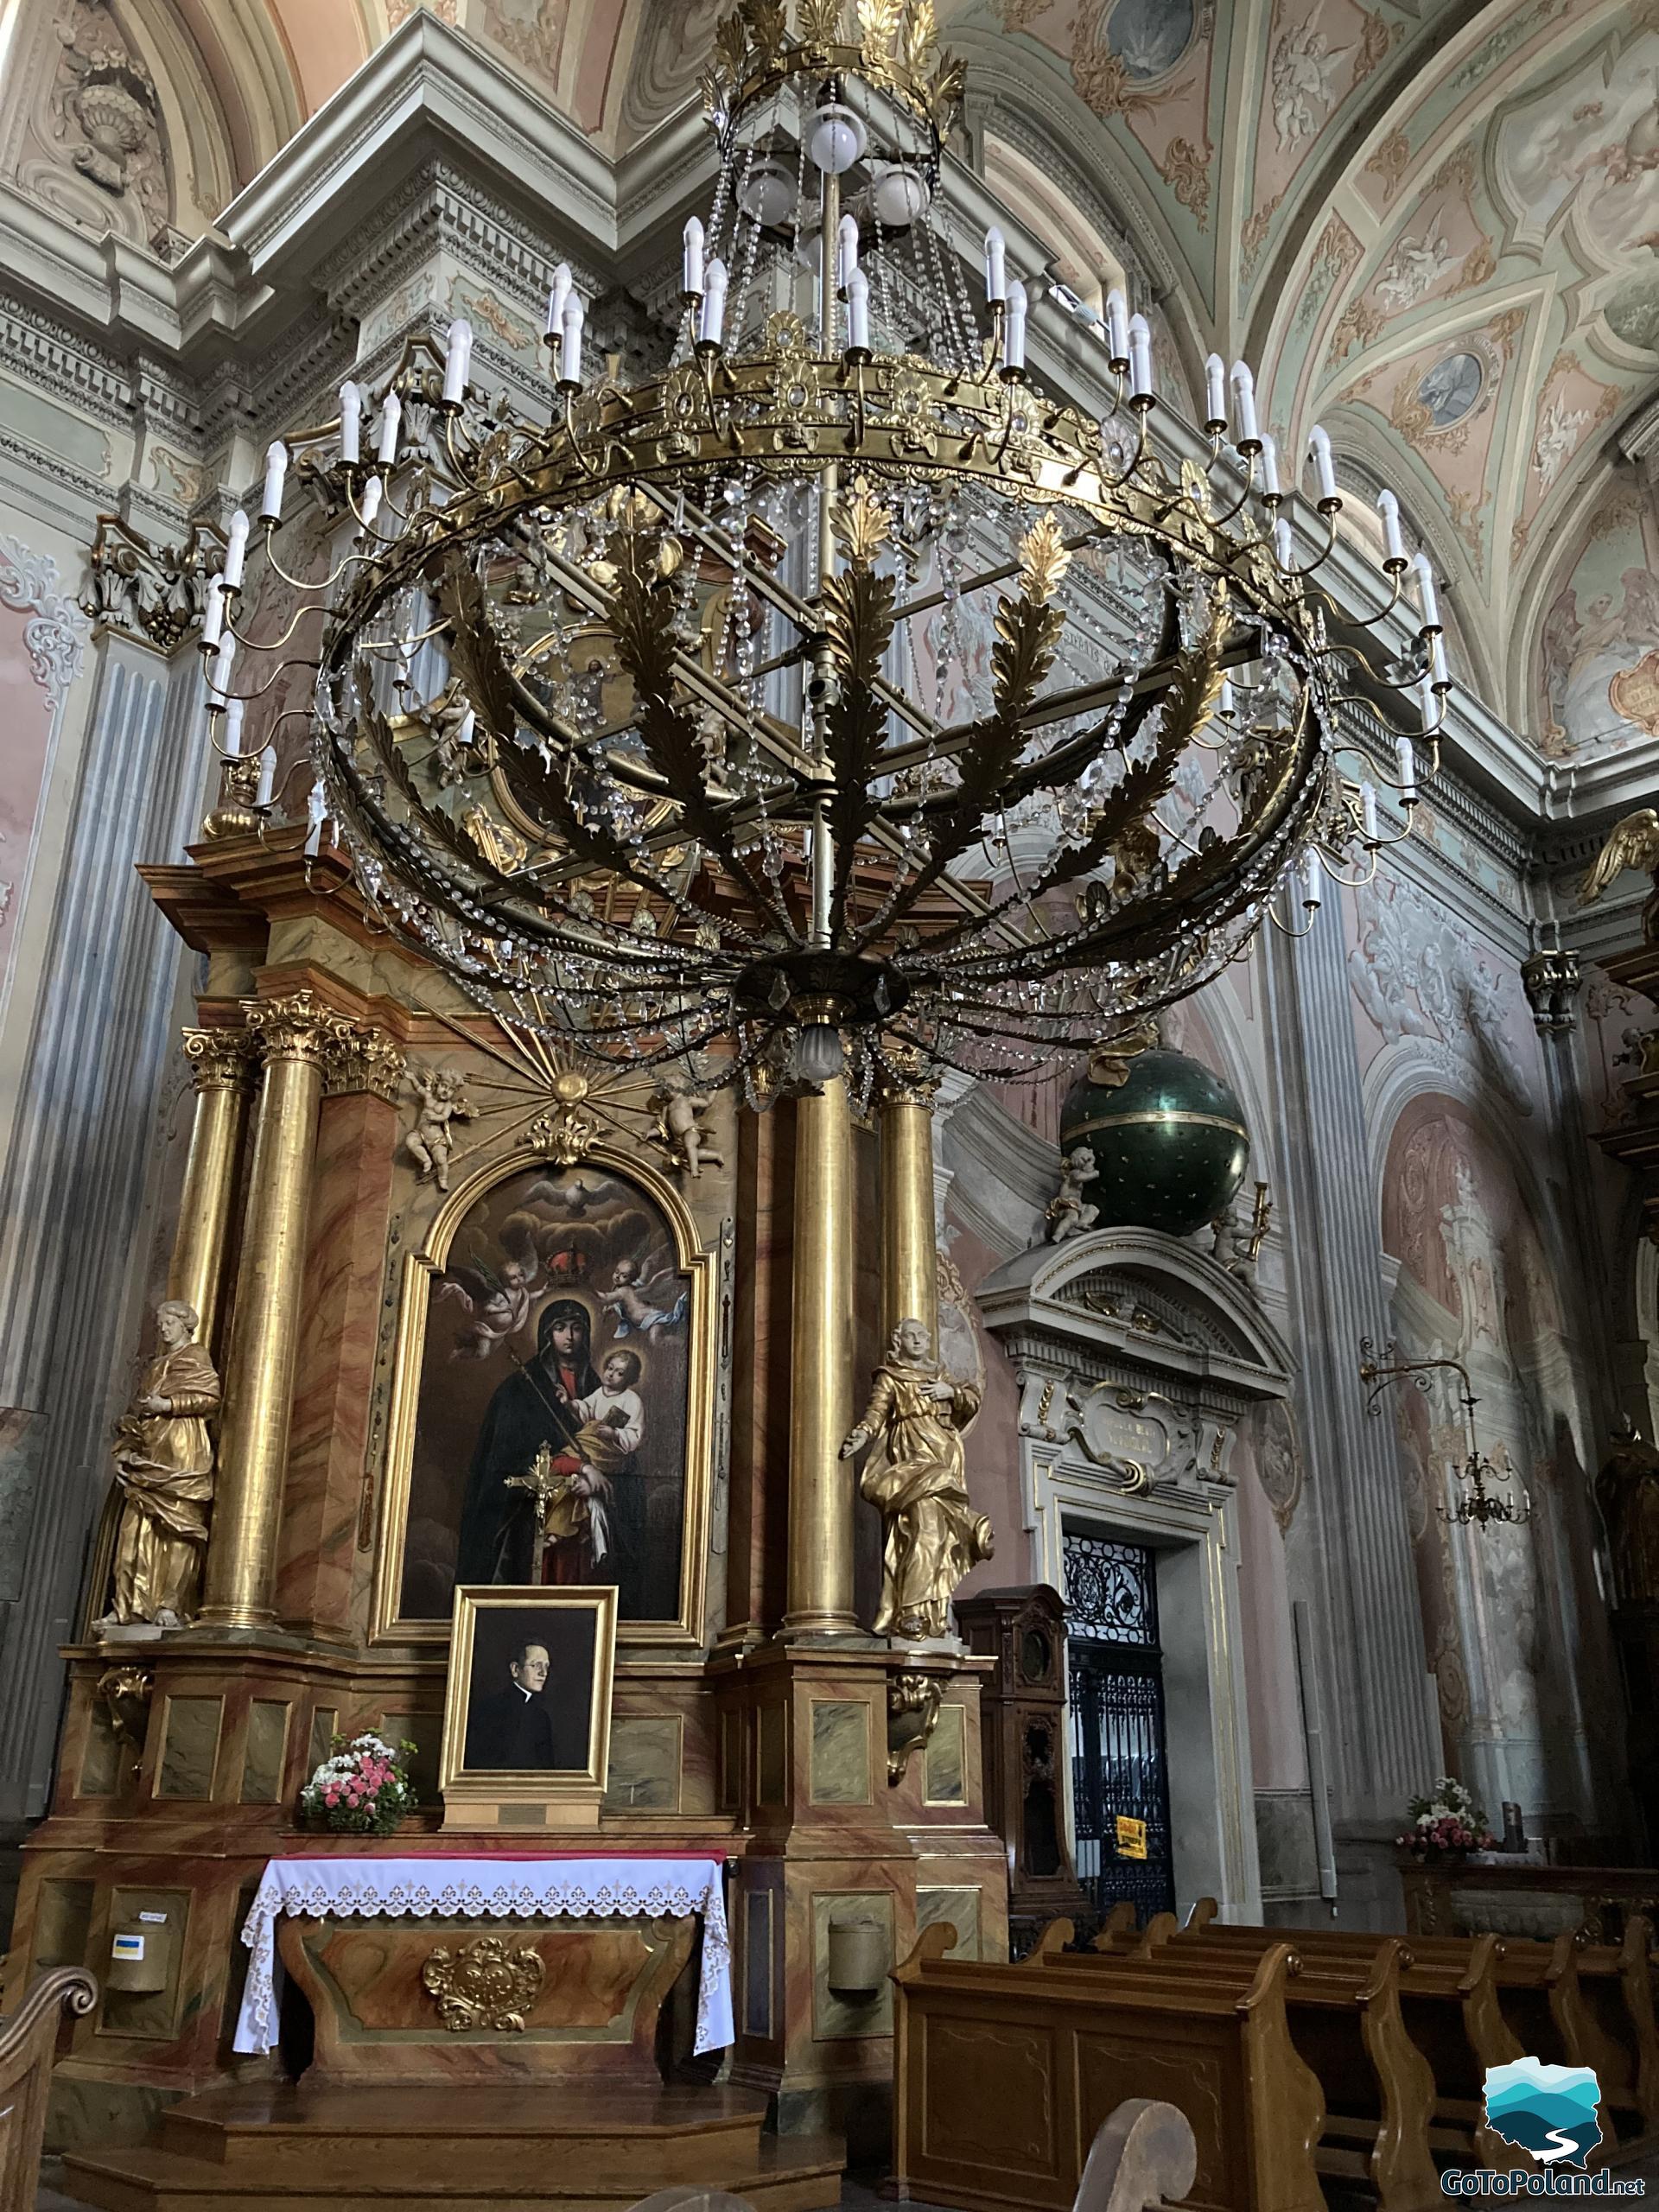 very large chandelier hangs in a church, side altar with the image of Mary